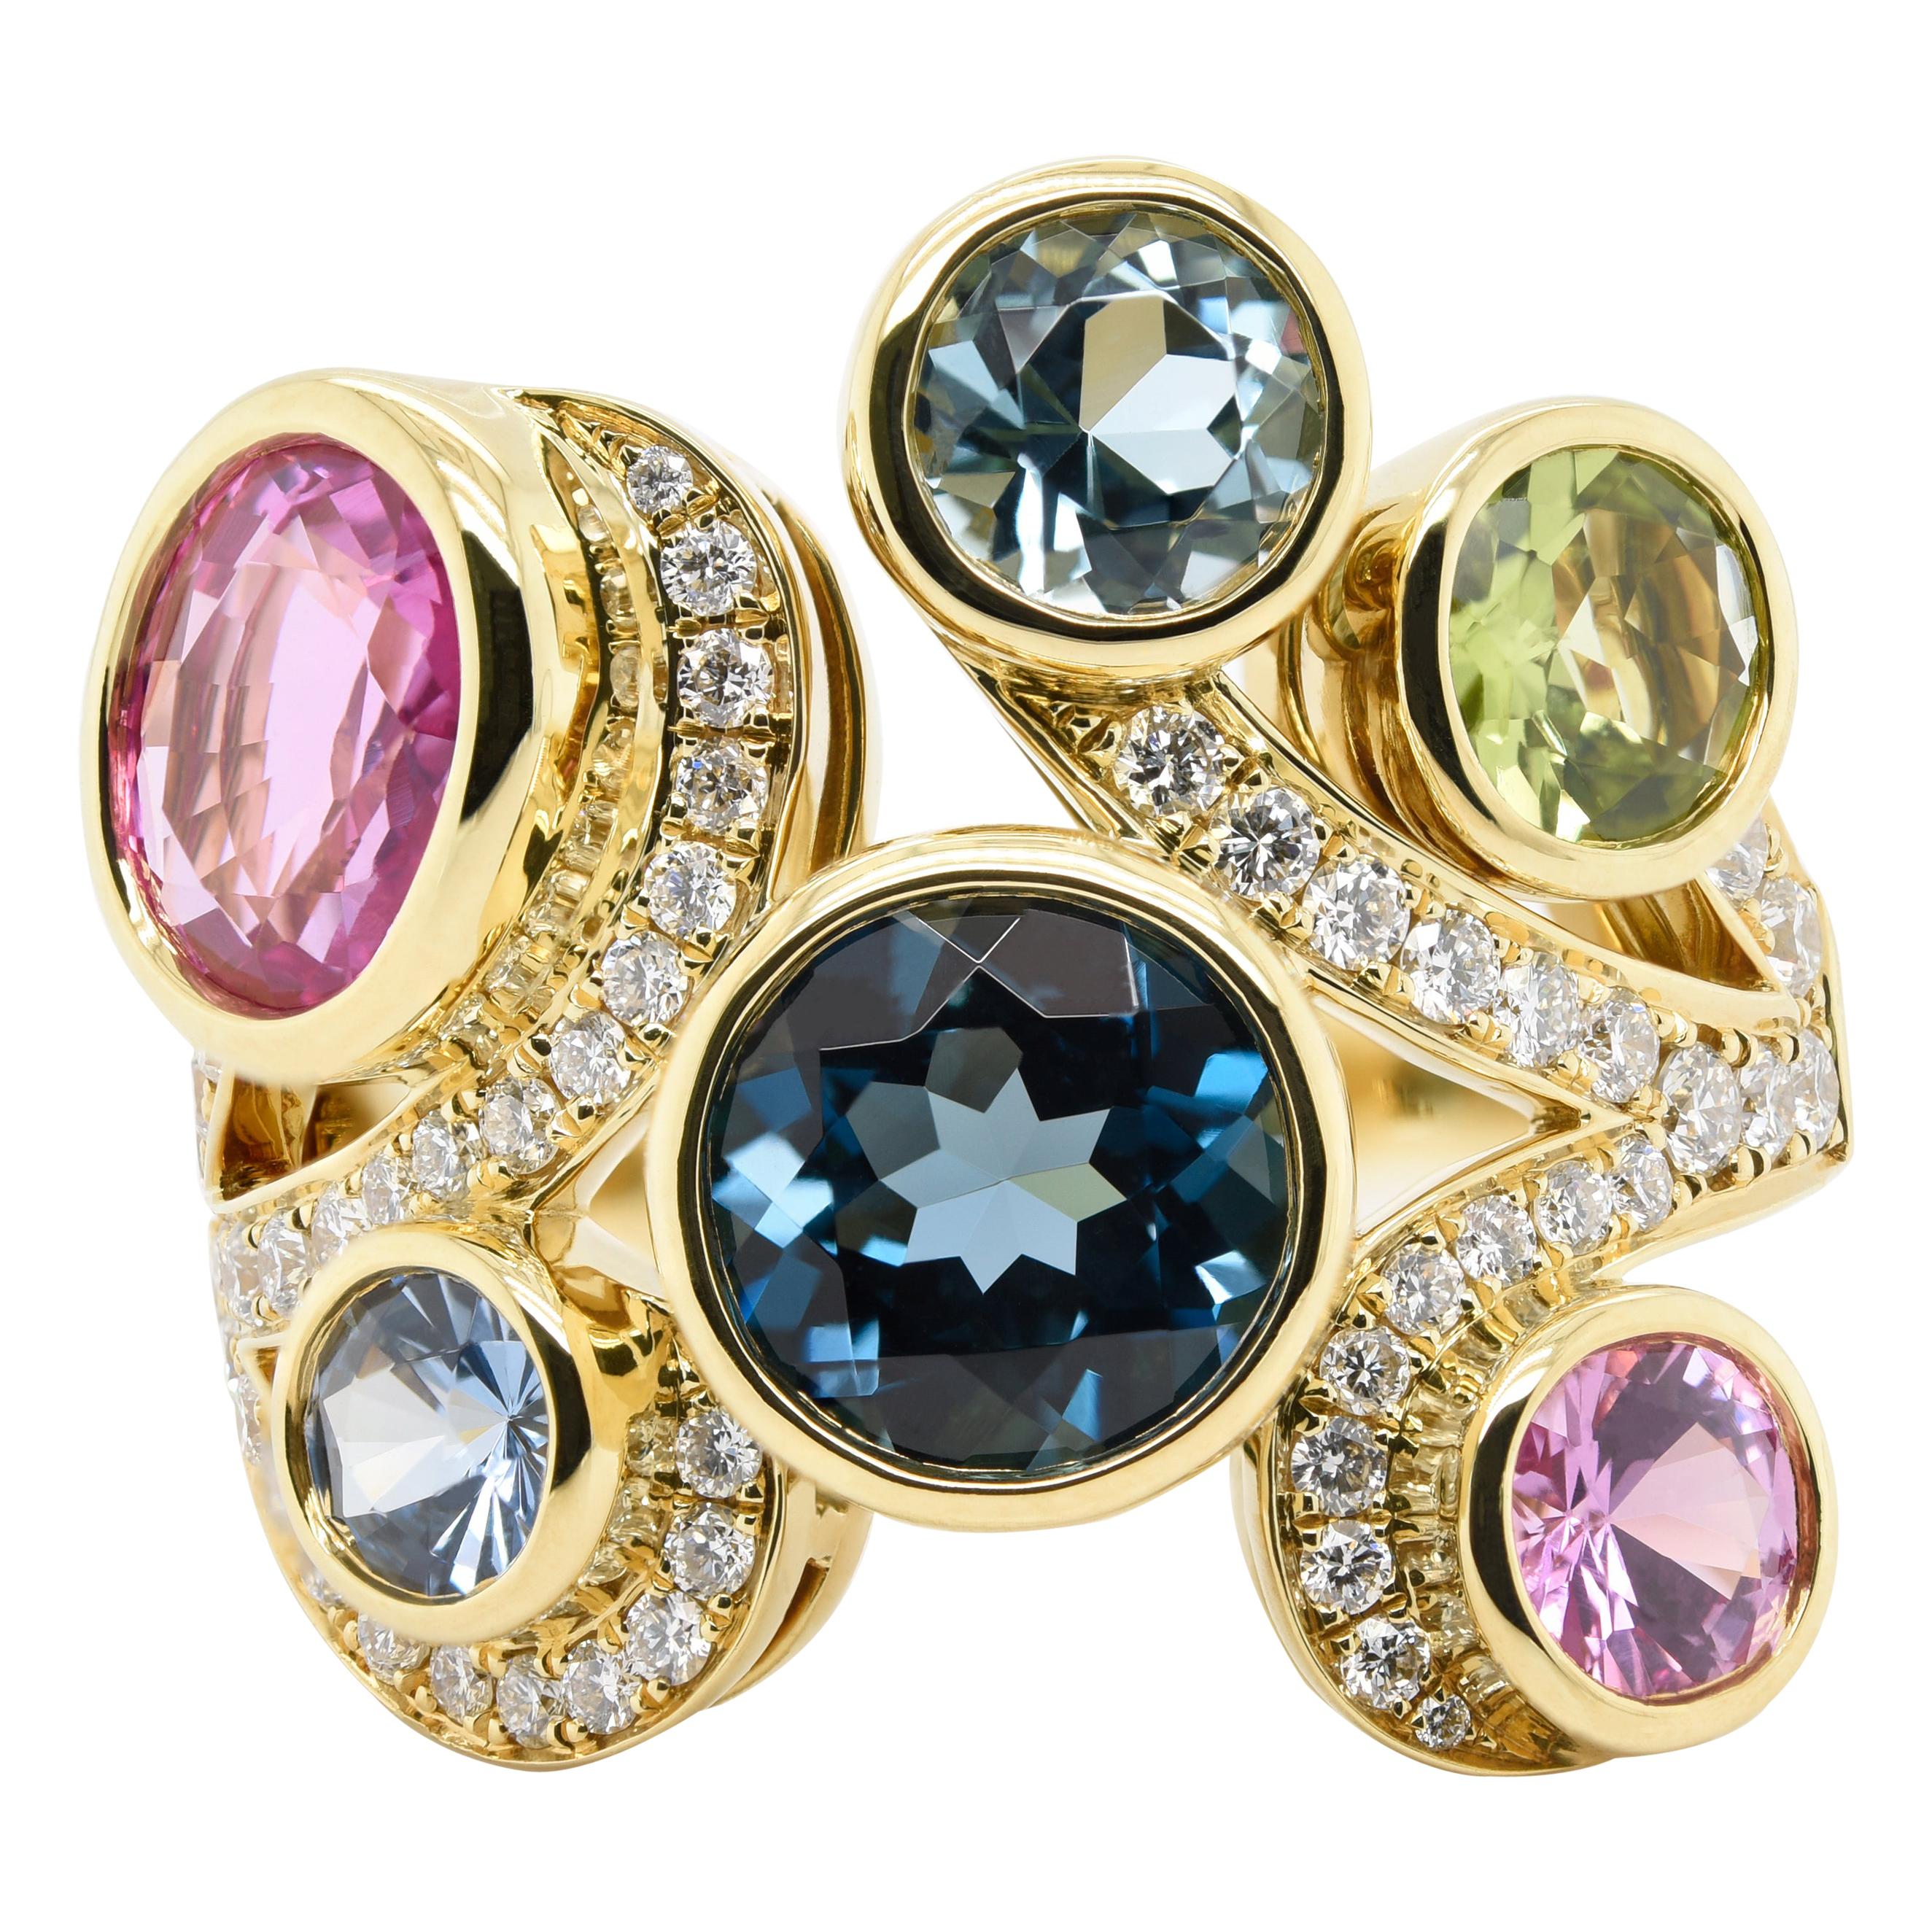 JAG New York 18 Karat Yellow Gold Ring with a Variety of Gemstones For Sale